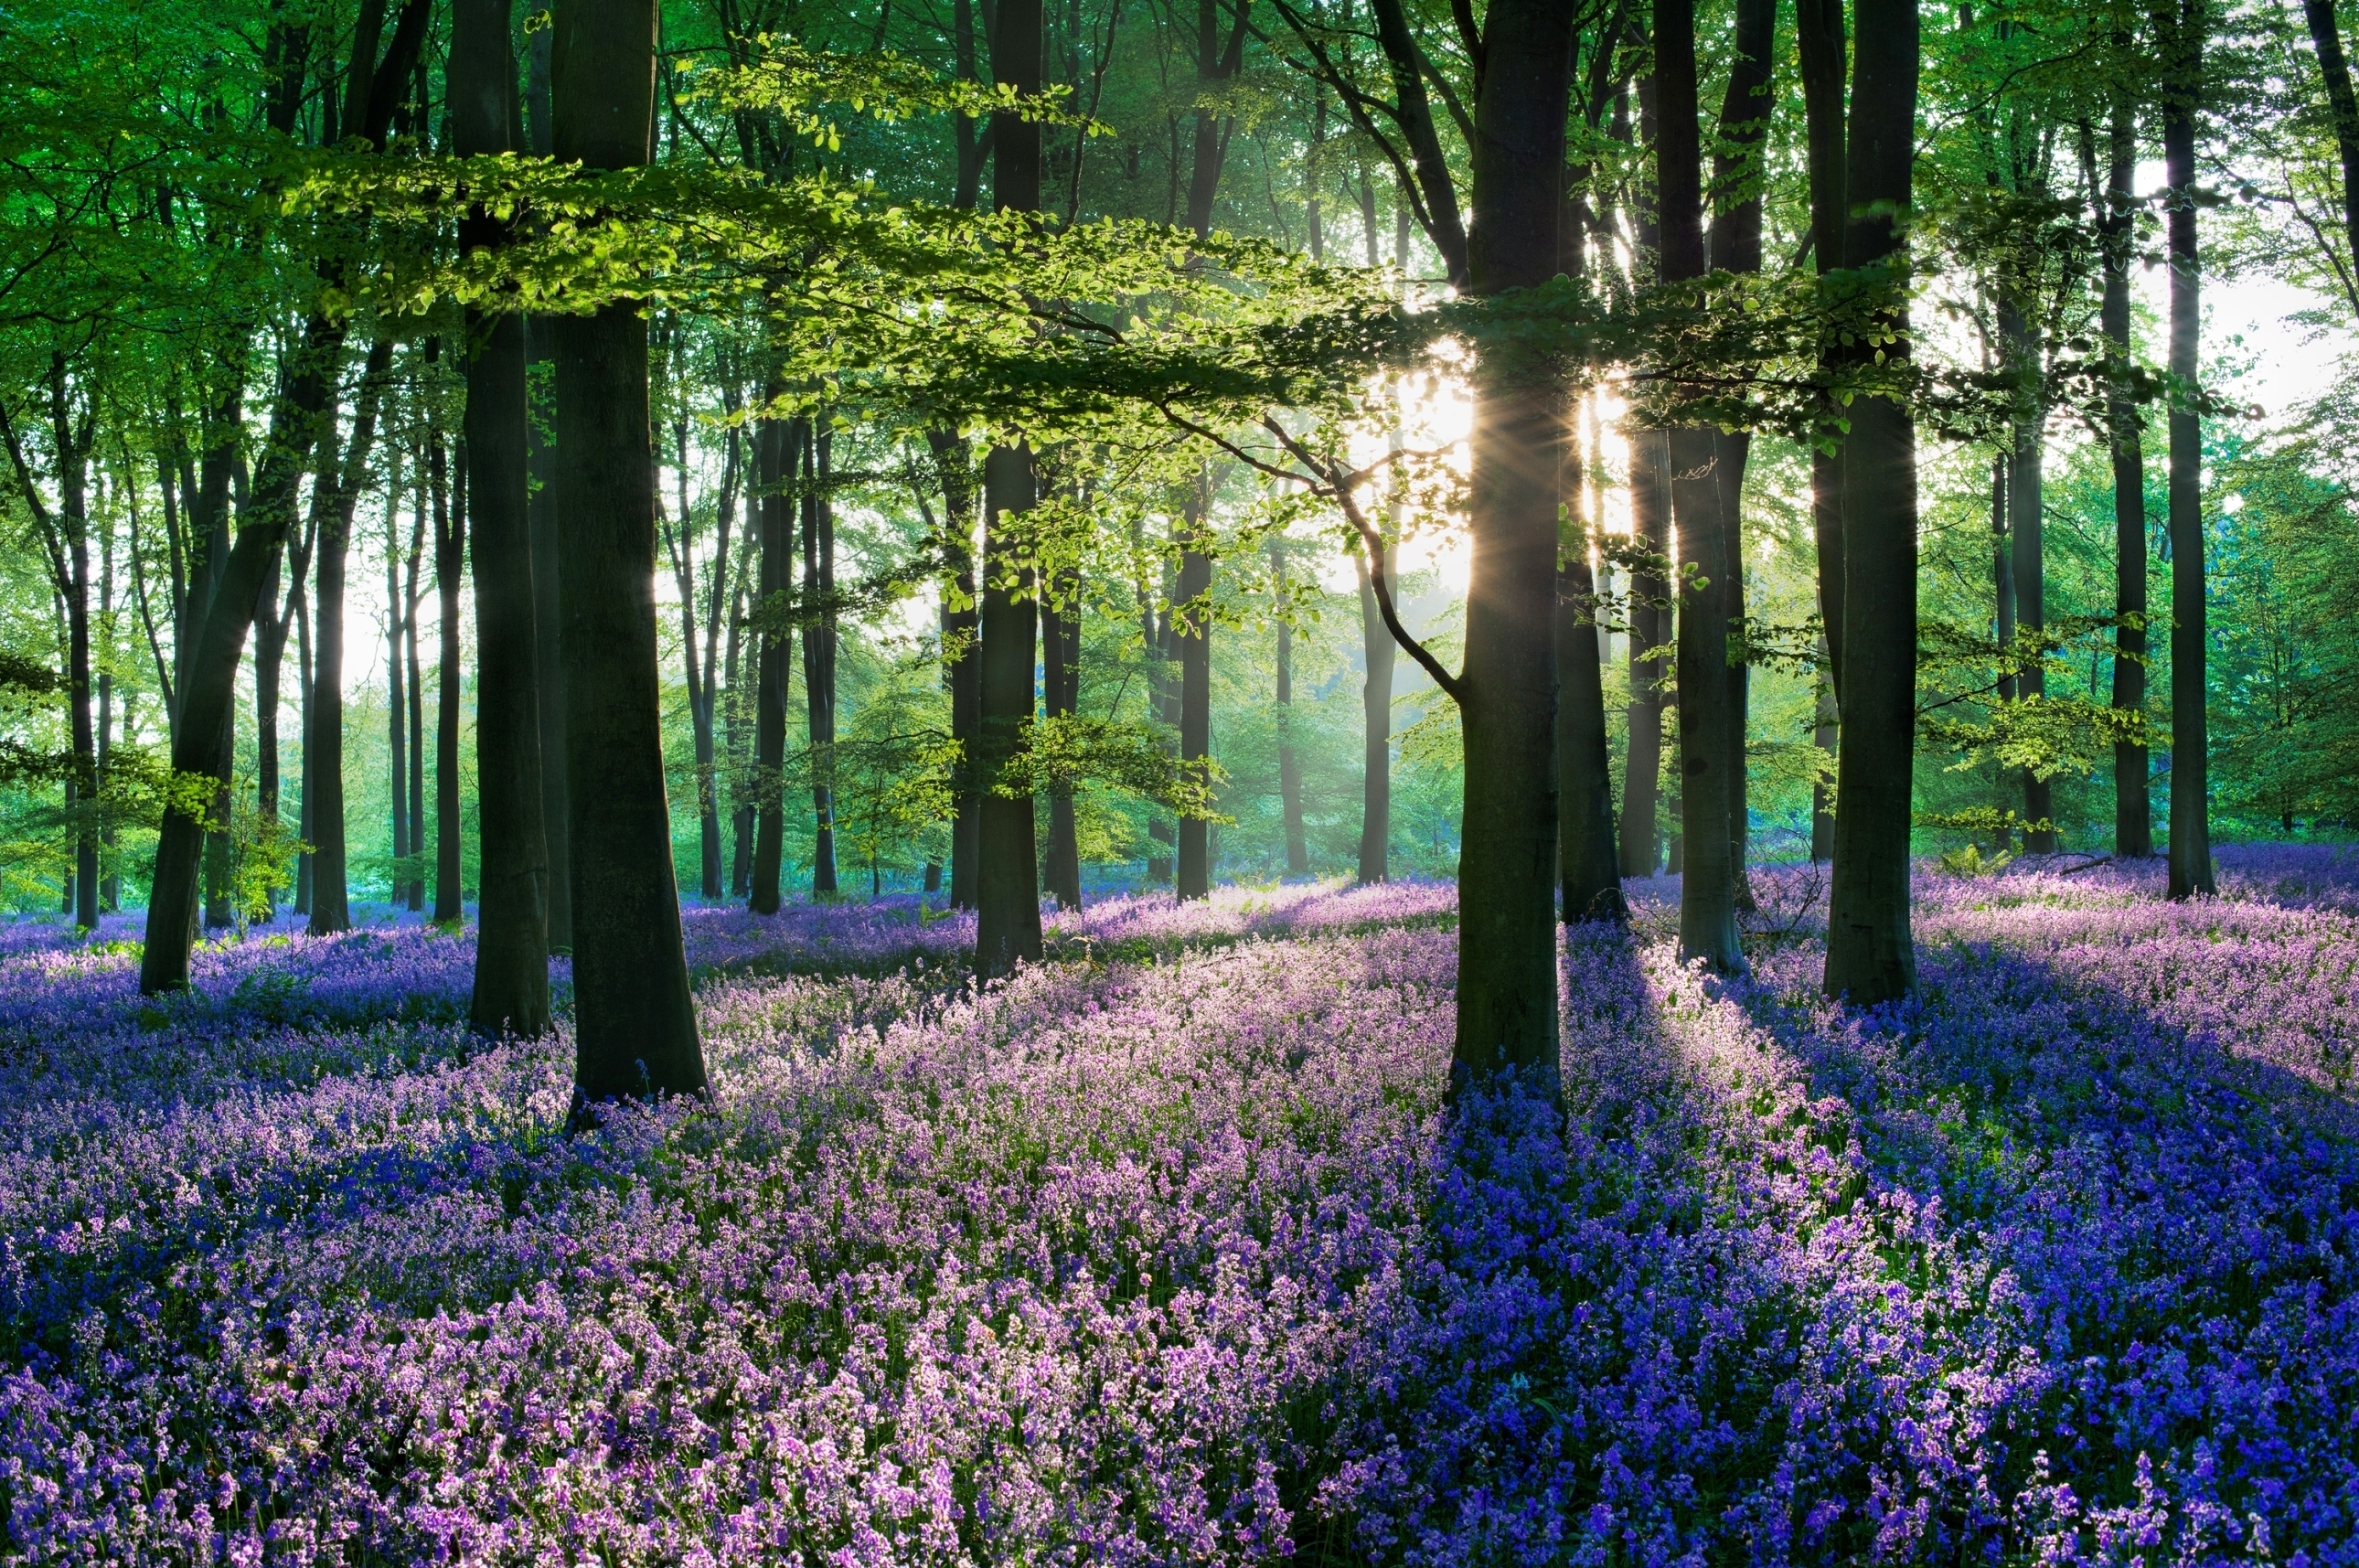 General 2580x1715 nature forest trees flowers colorful sunlight